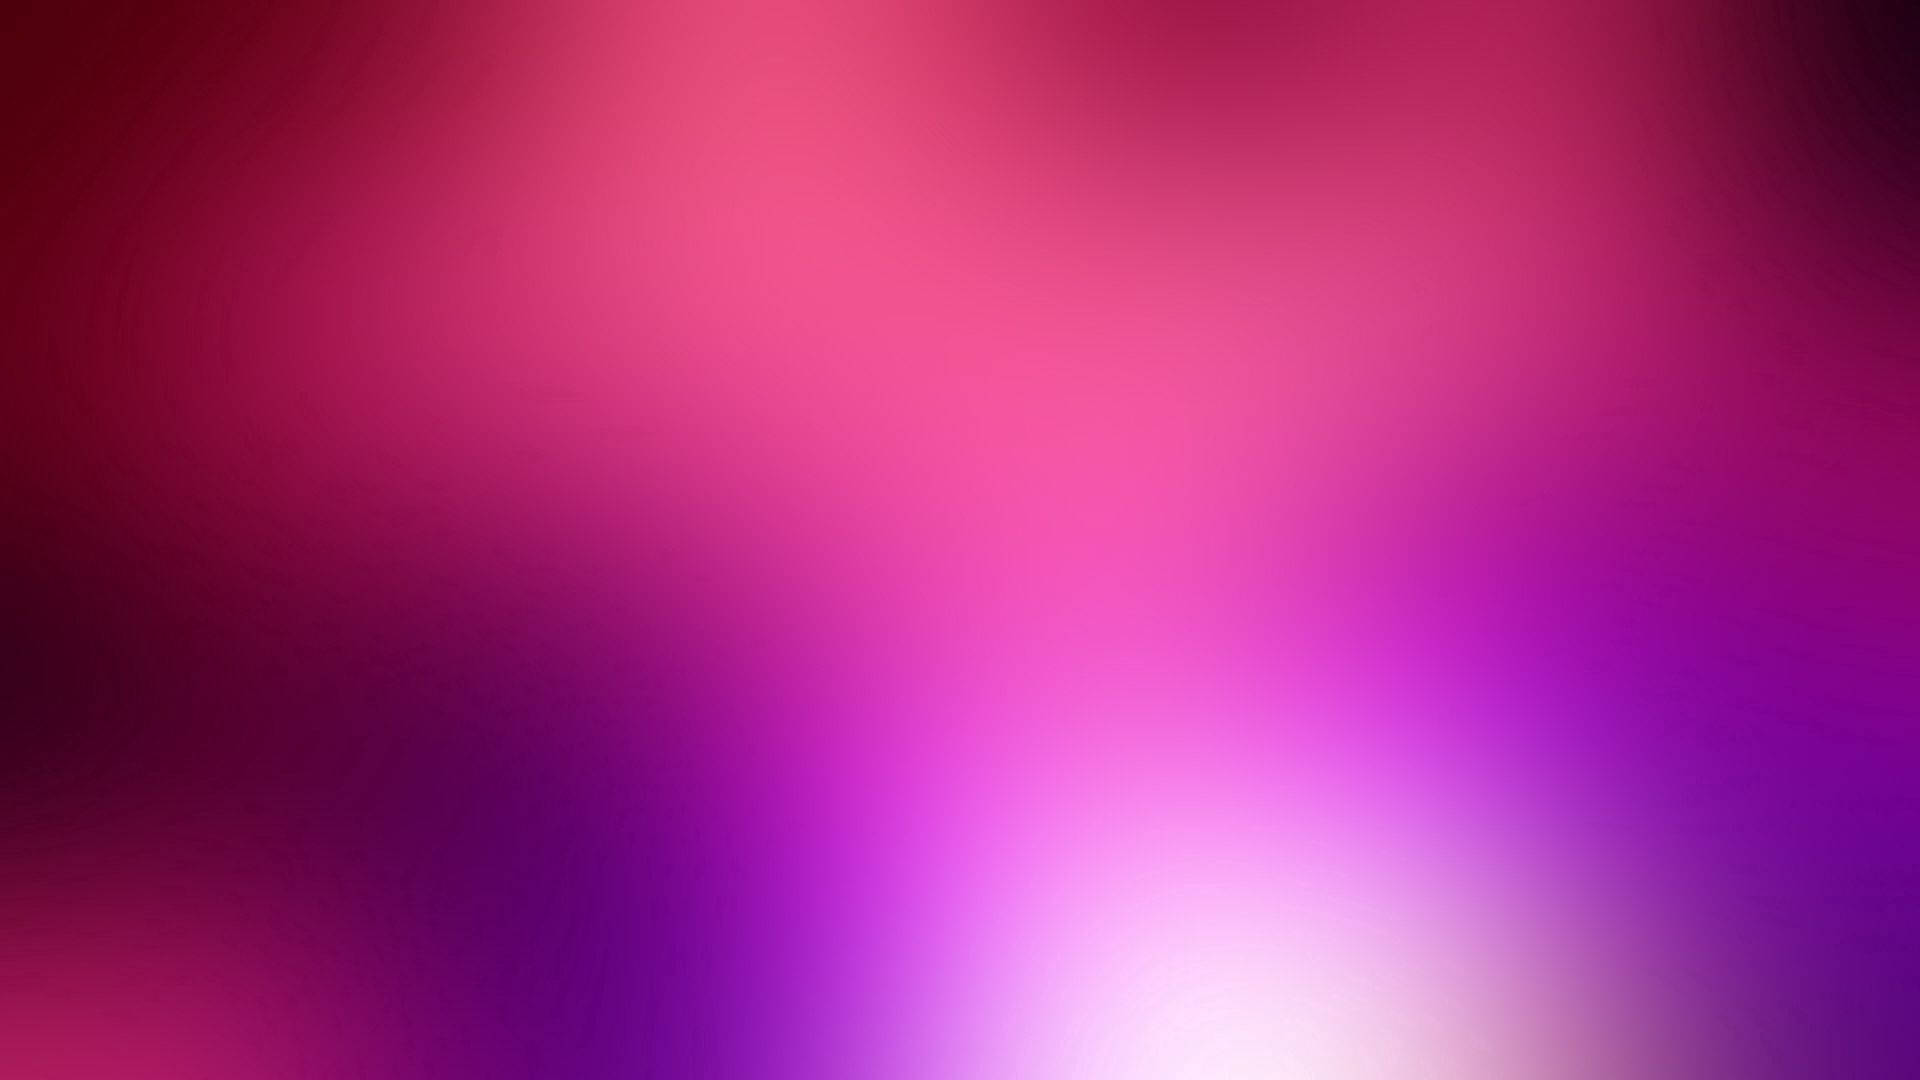 Bright Blurred Pink Picture